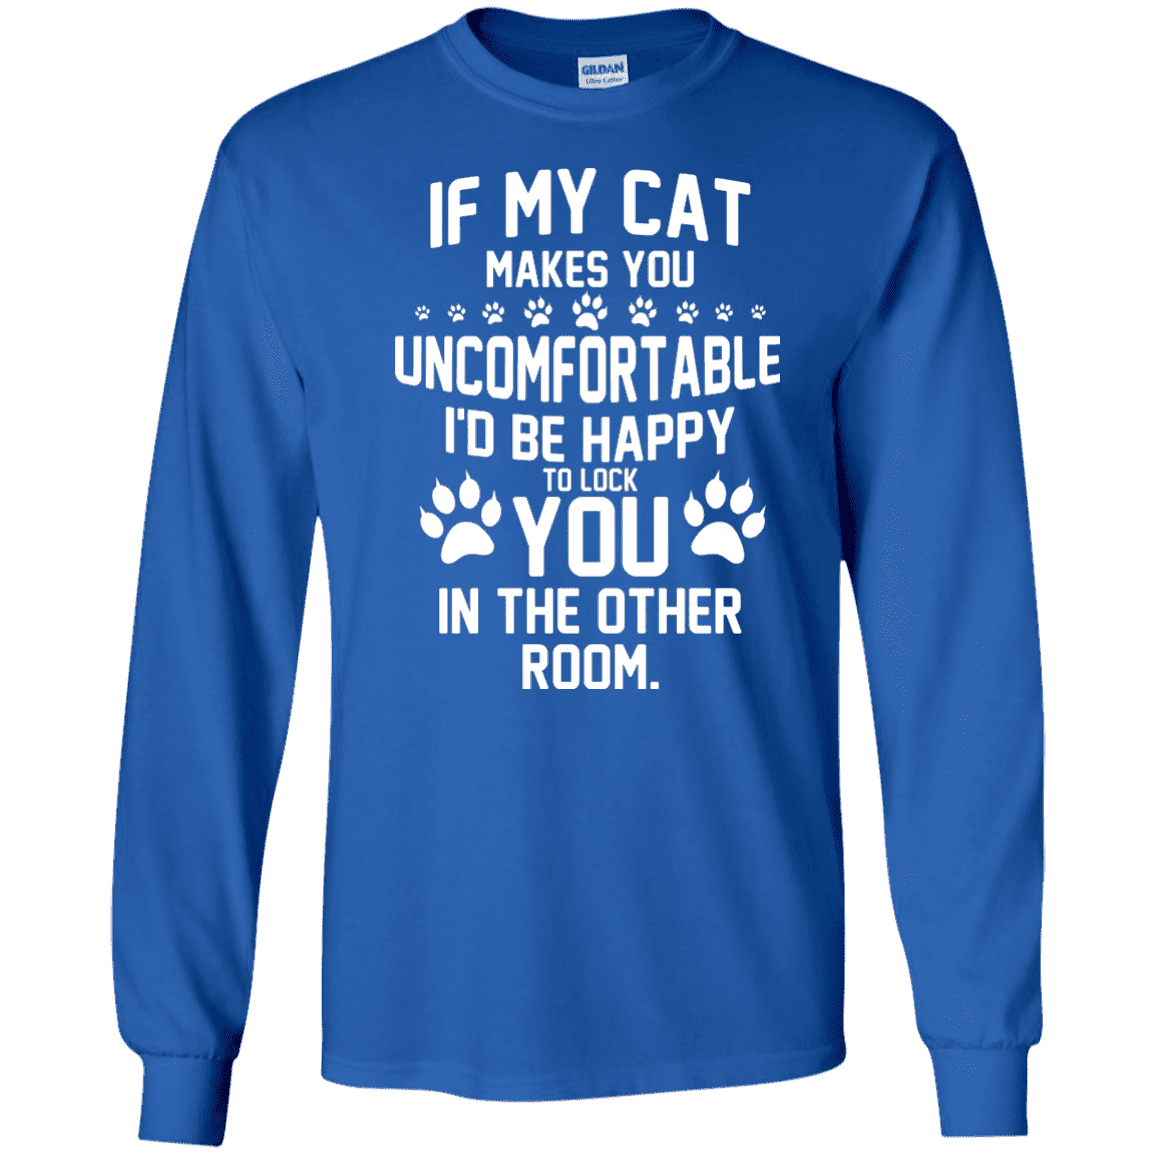 If My Cat makes You Uncomfortable - Long Sleeve T Shirt – Rescuers Club